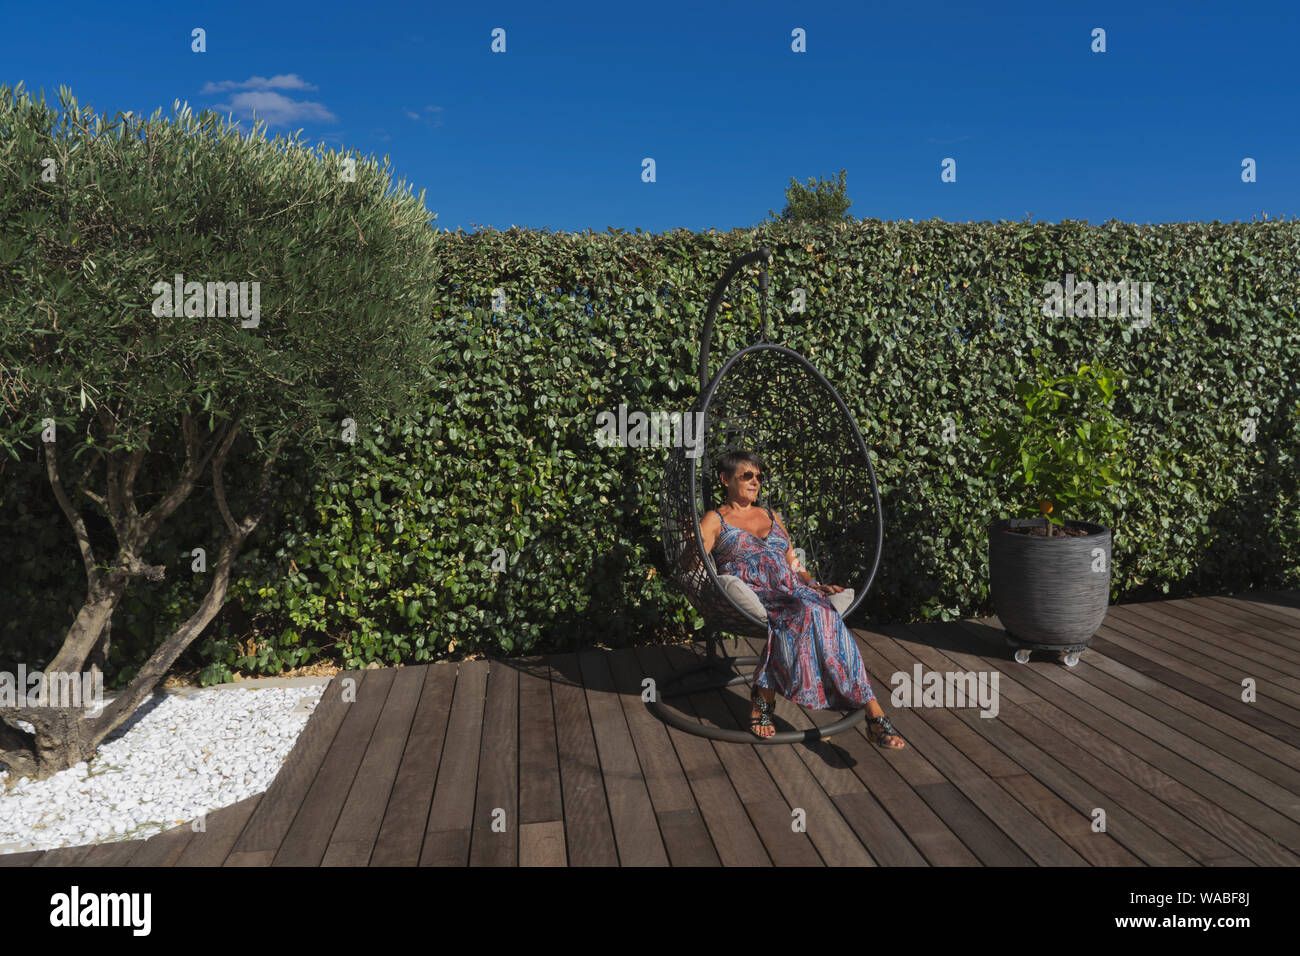 a woman sit in a suspended seat on a wooden floor in a garden with an olive tree Stock Photo